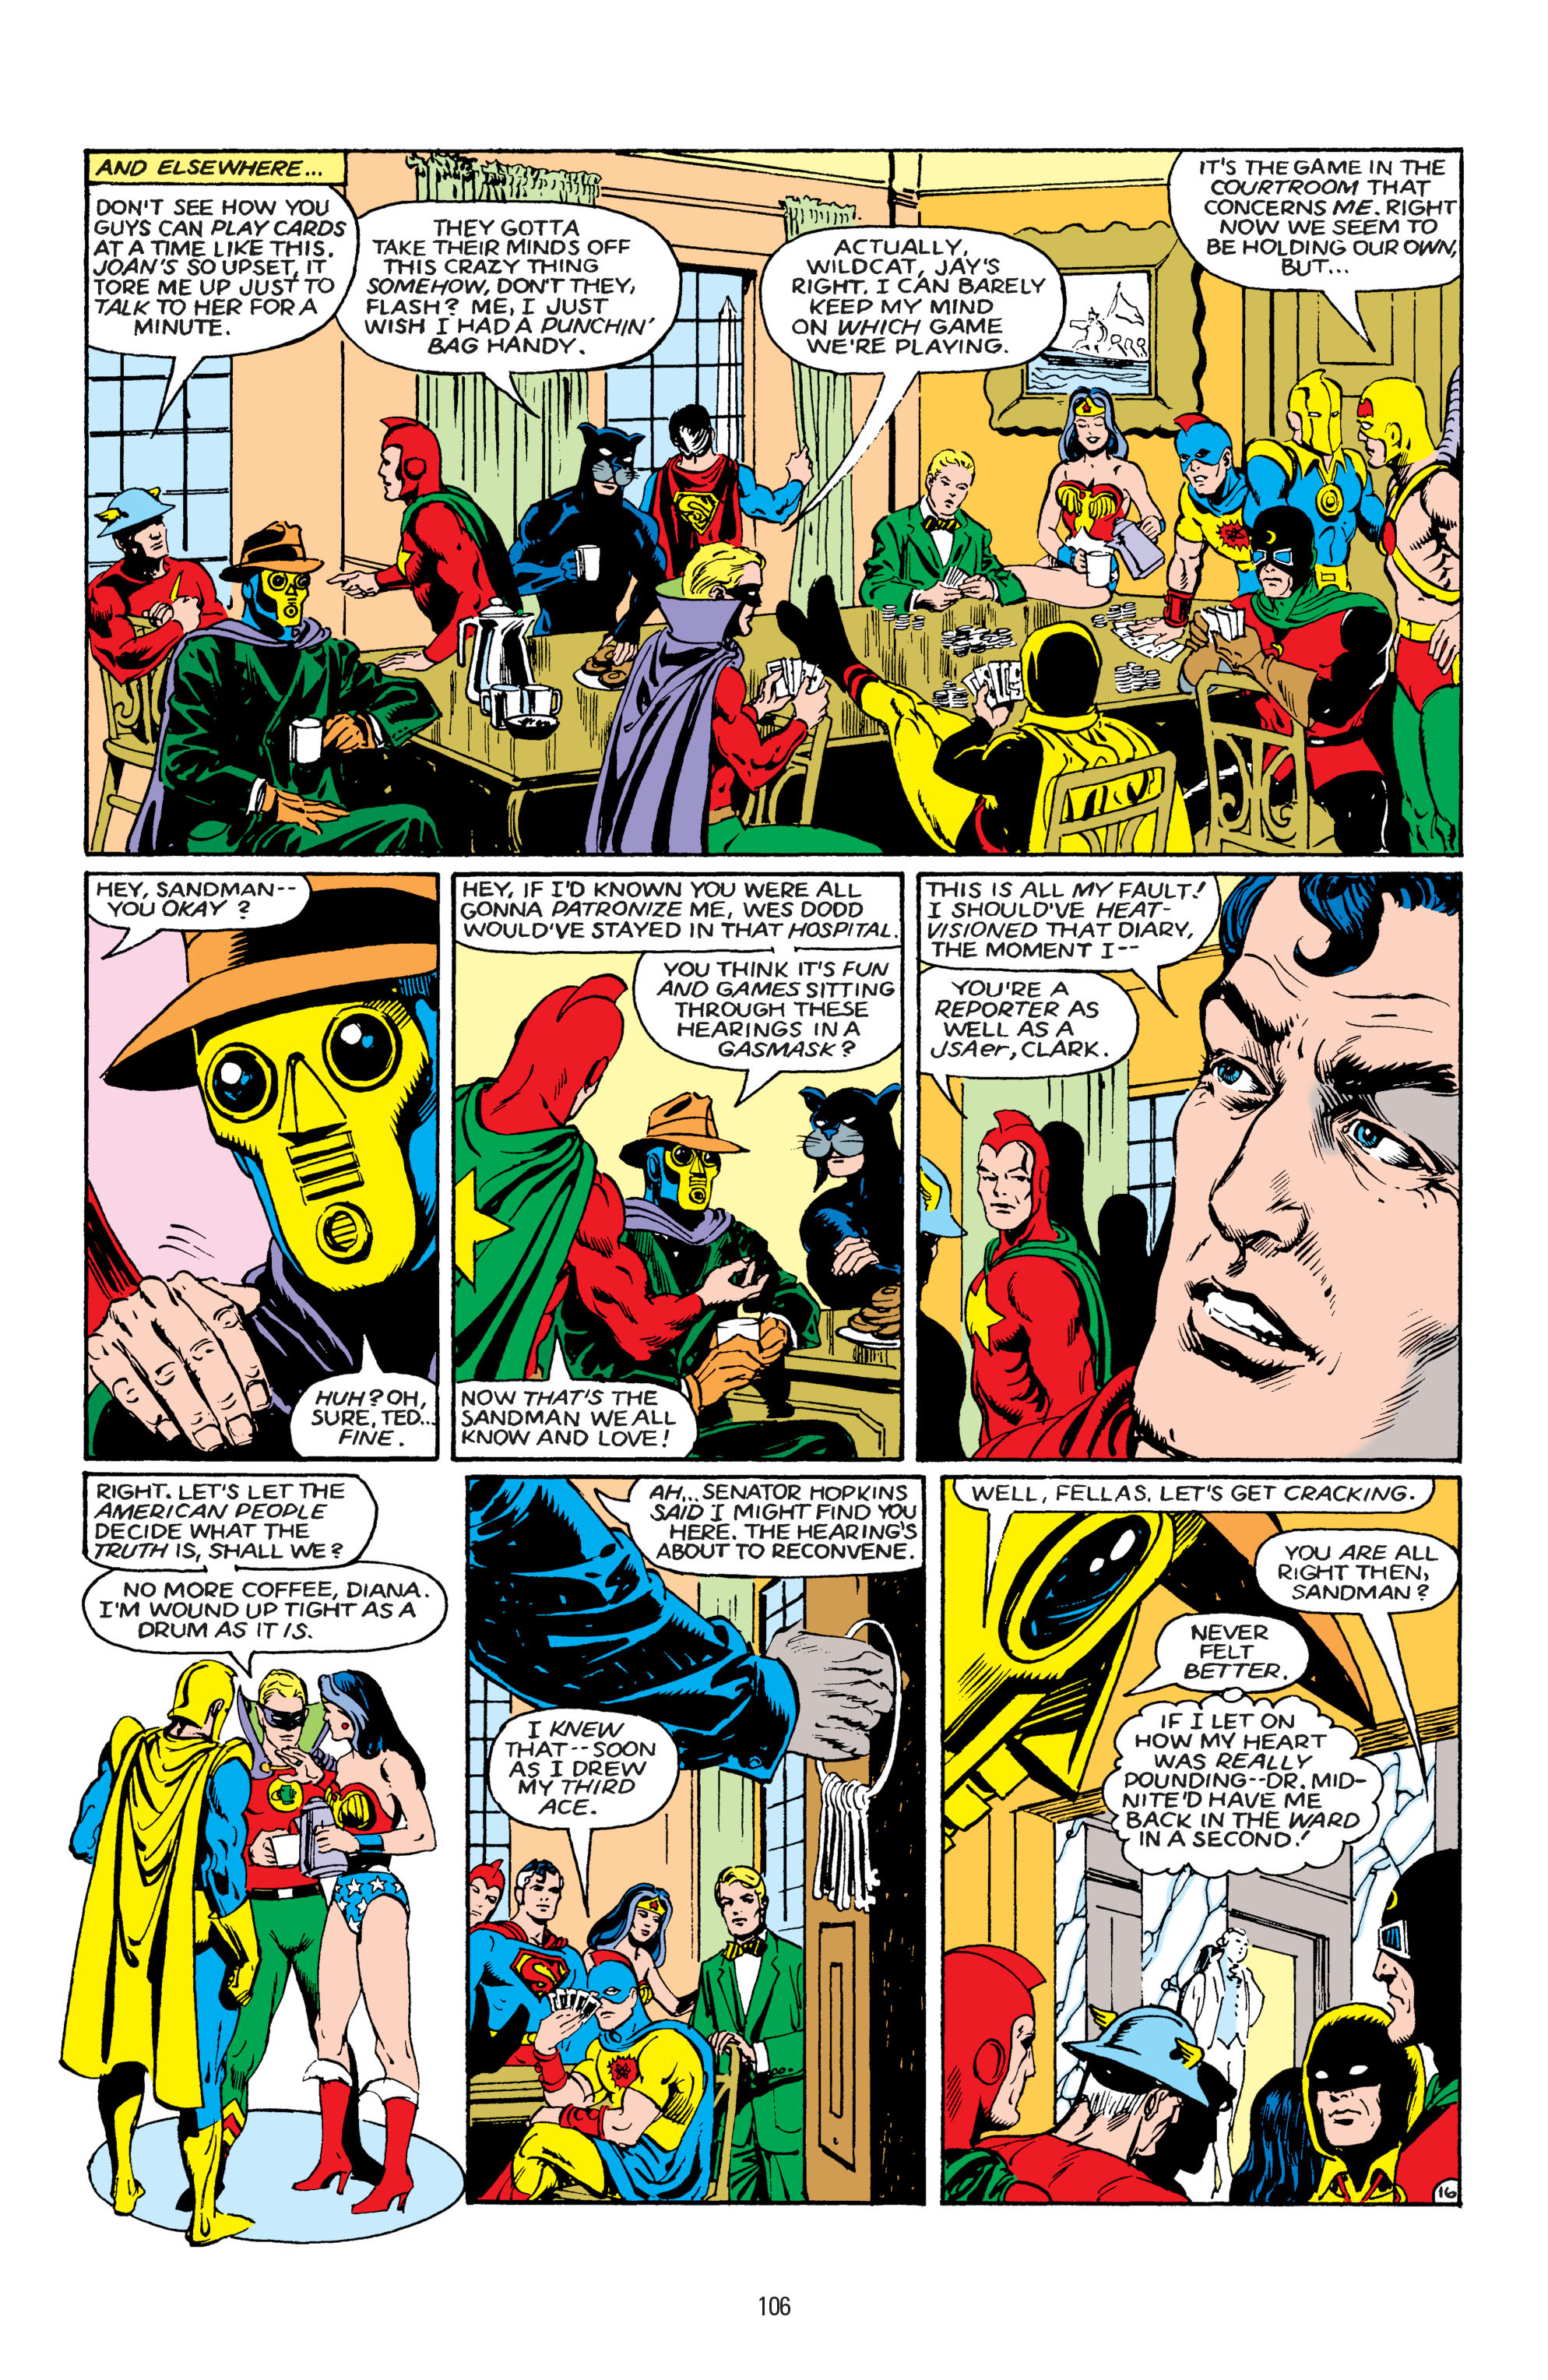 Read online America vs. the Justice Society comic -  Issue # TPB - 102